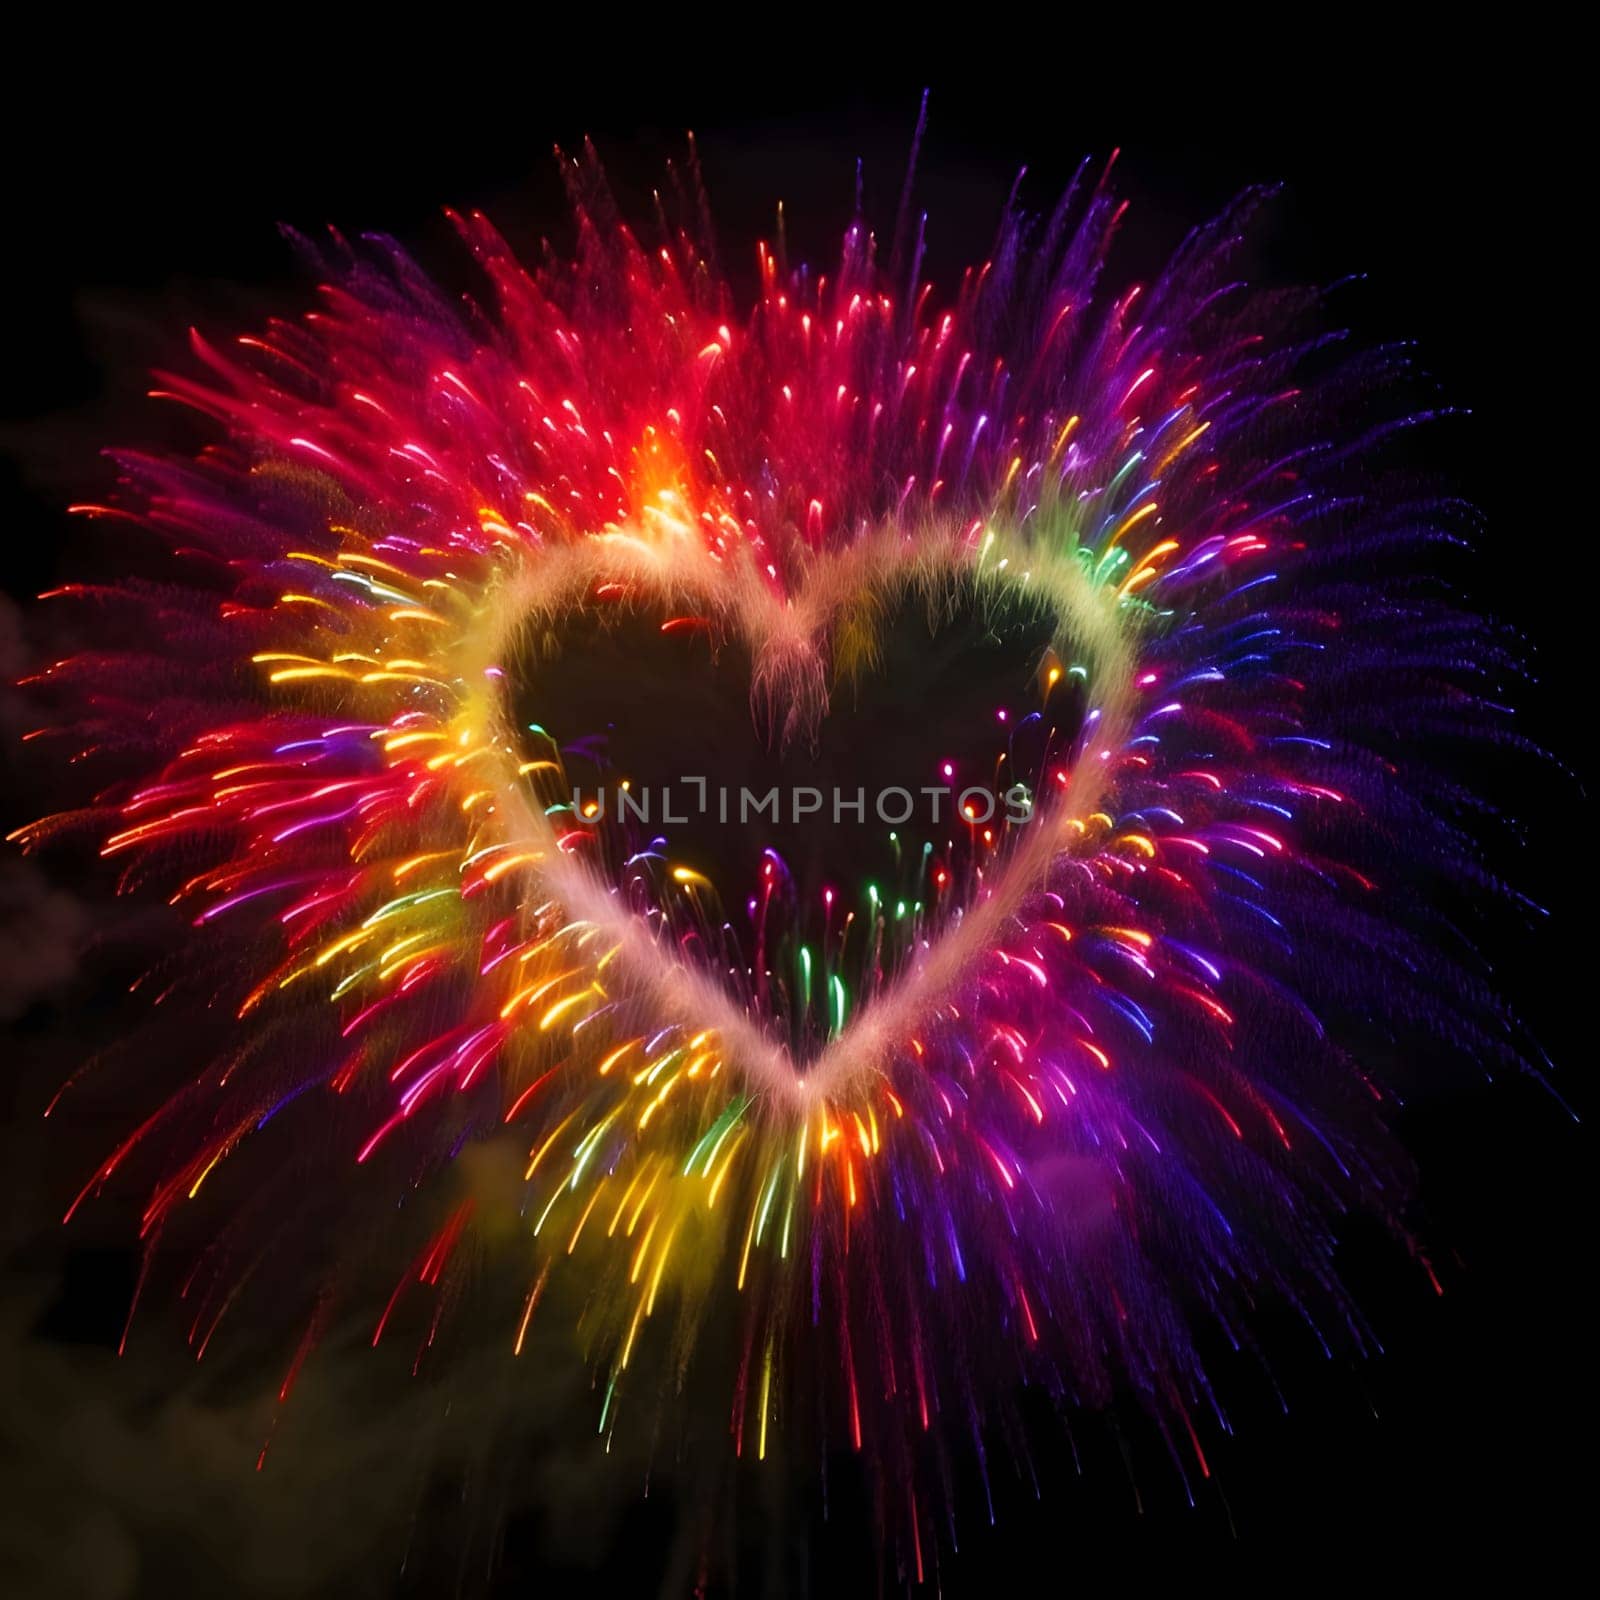 Colorful rainbow heart with bursts of colorful fireworks on a dark background. Heart as a symbol of affection and love. The time of falling in love and love.